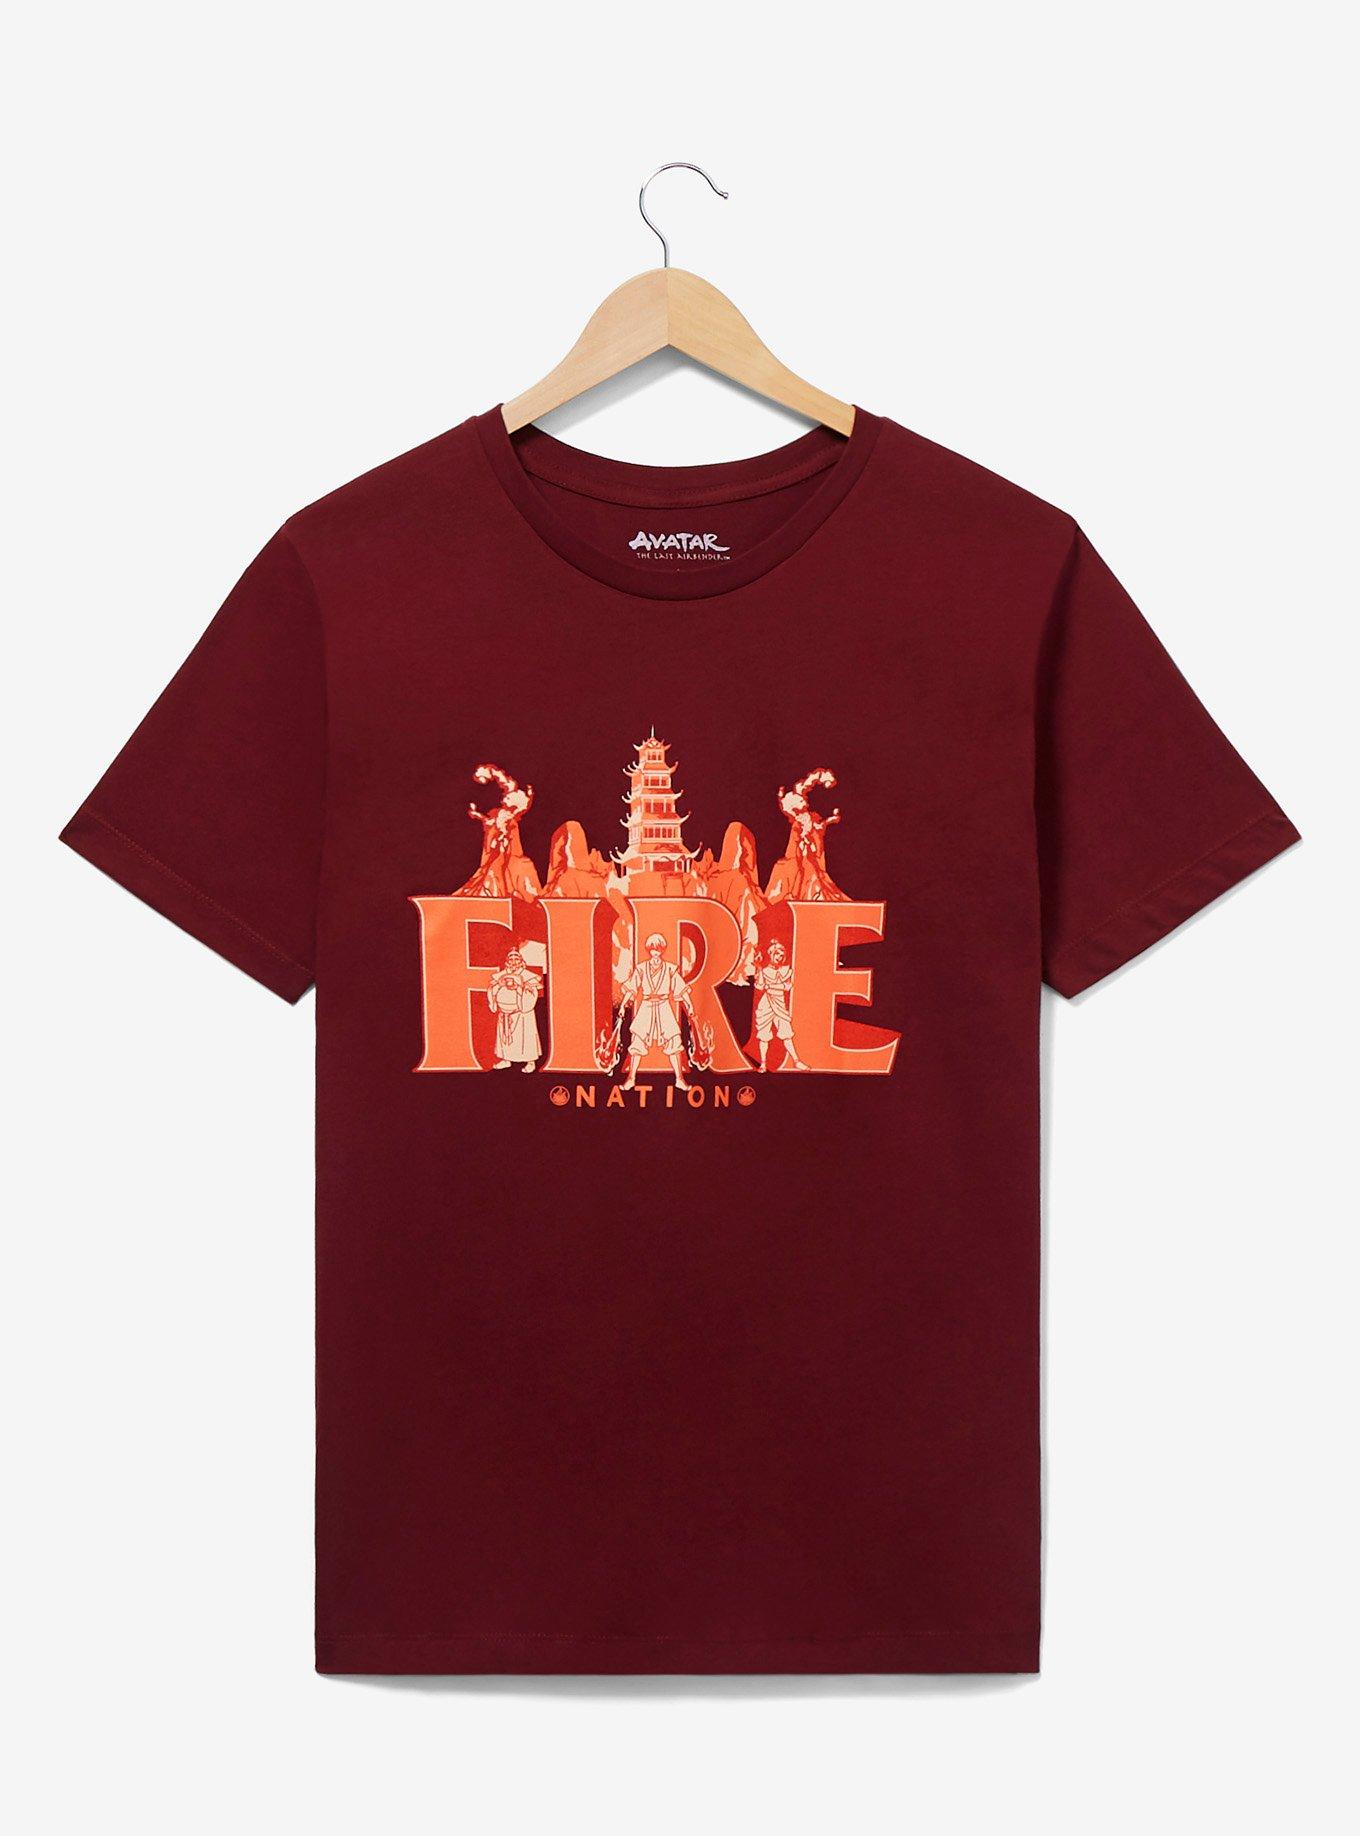 Avatar: The Last Airbender Tonal Fire Nation Portrait T-Shirt - BoxLunch Exclusive, DARK RED, hi-res